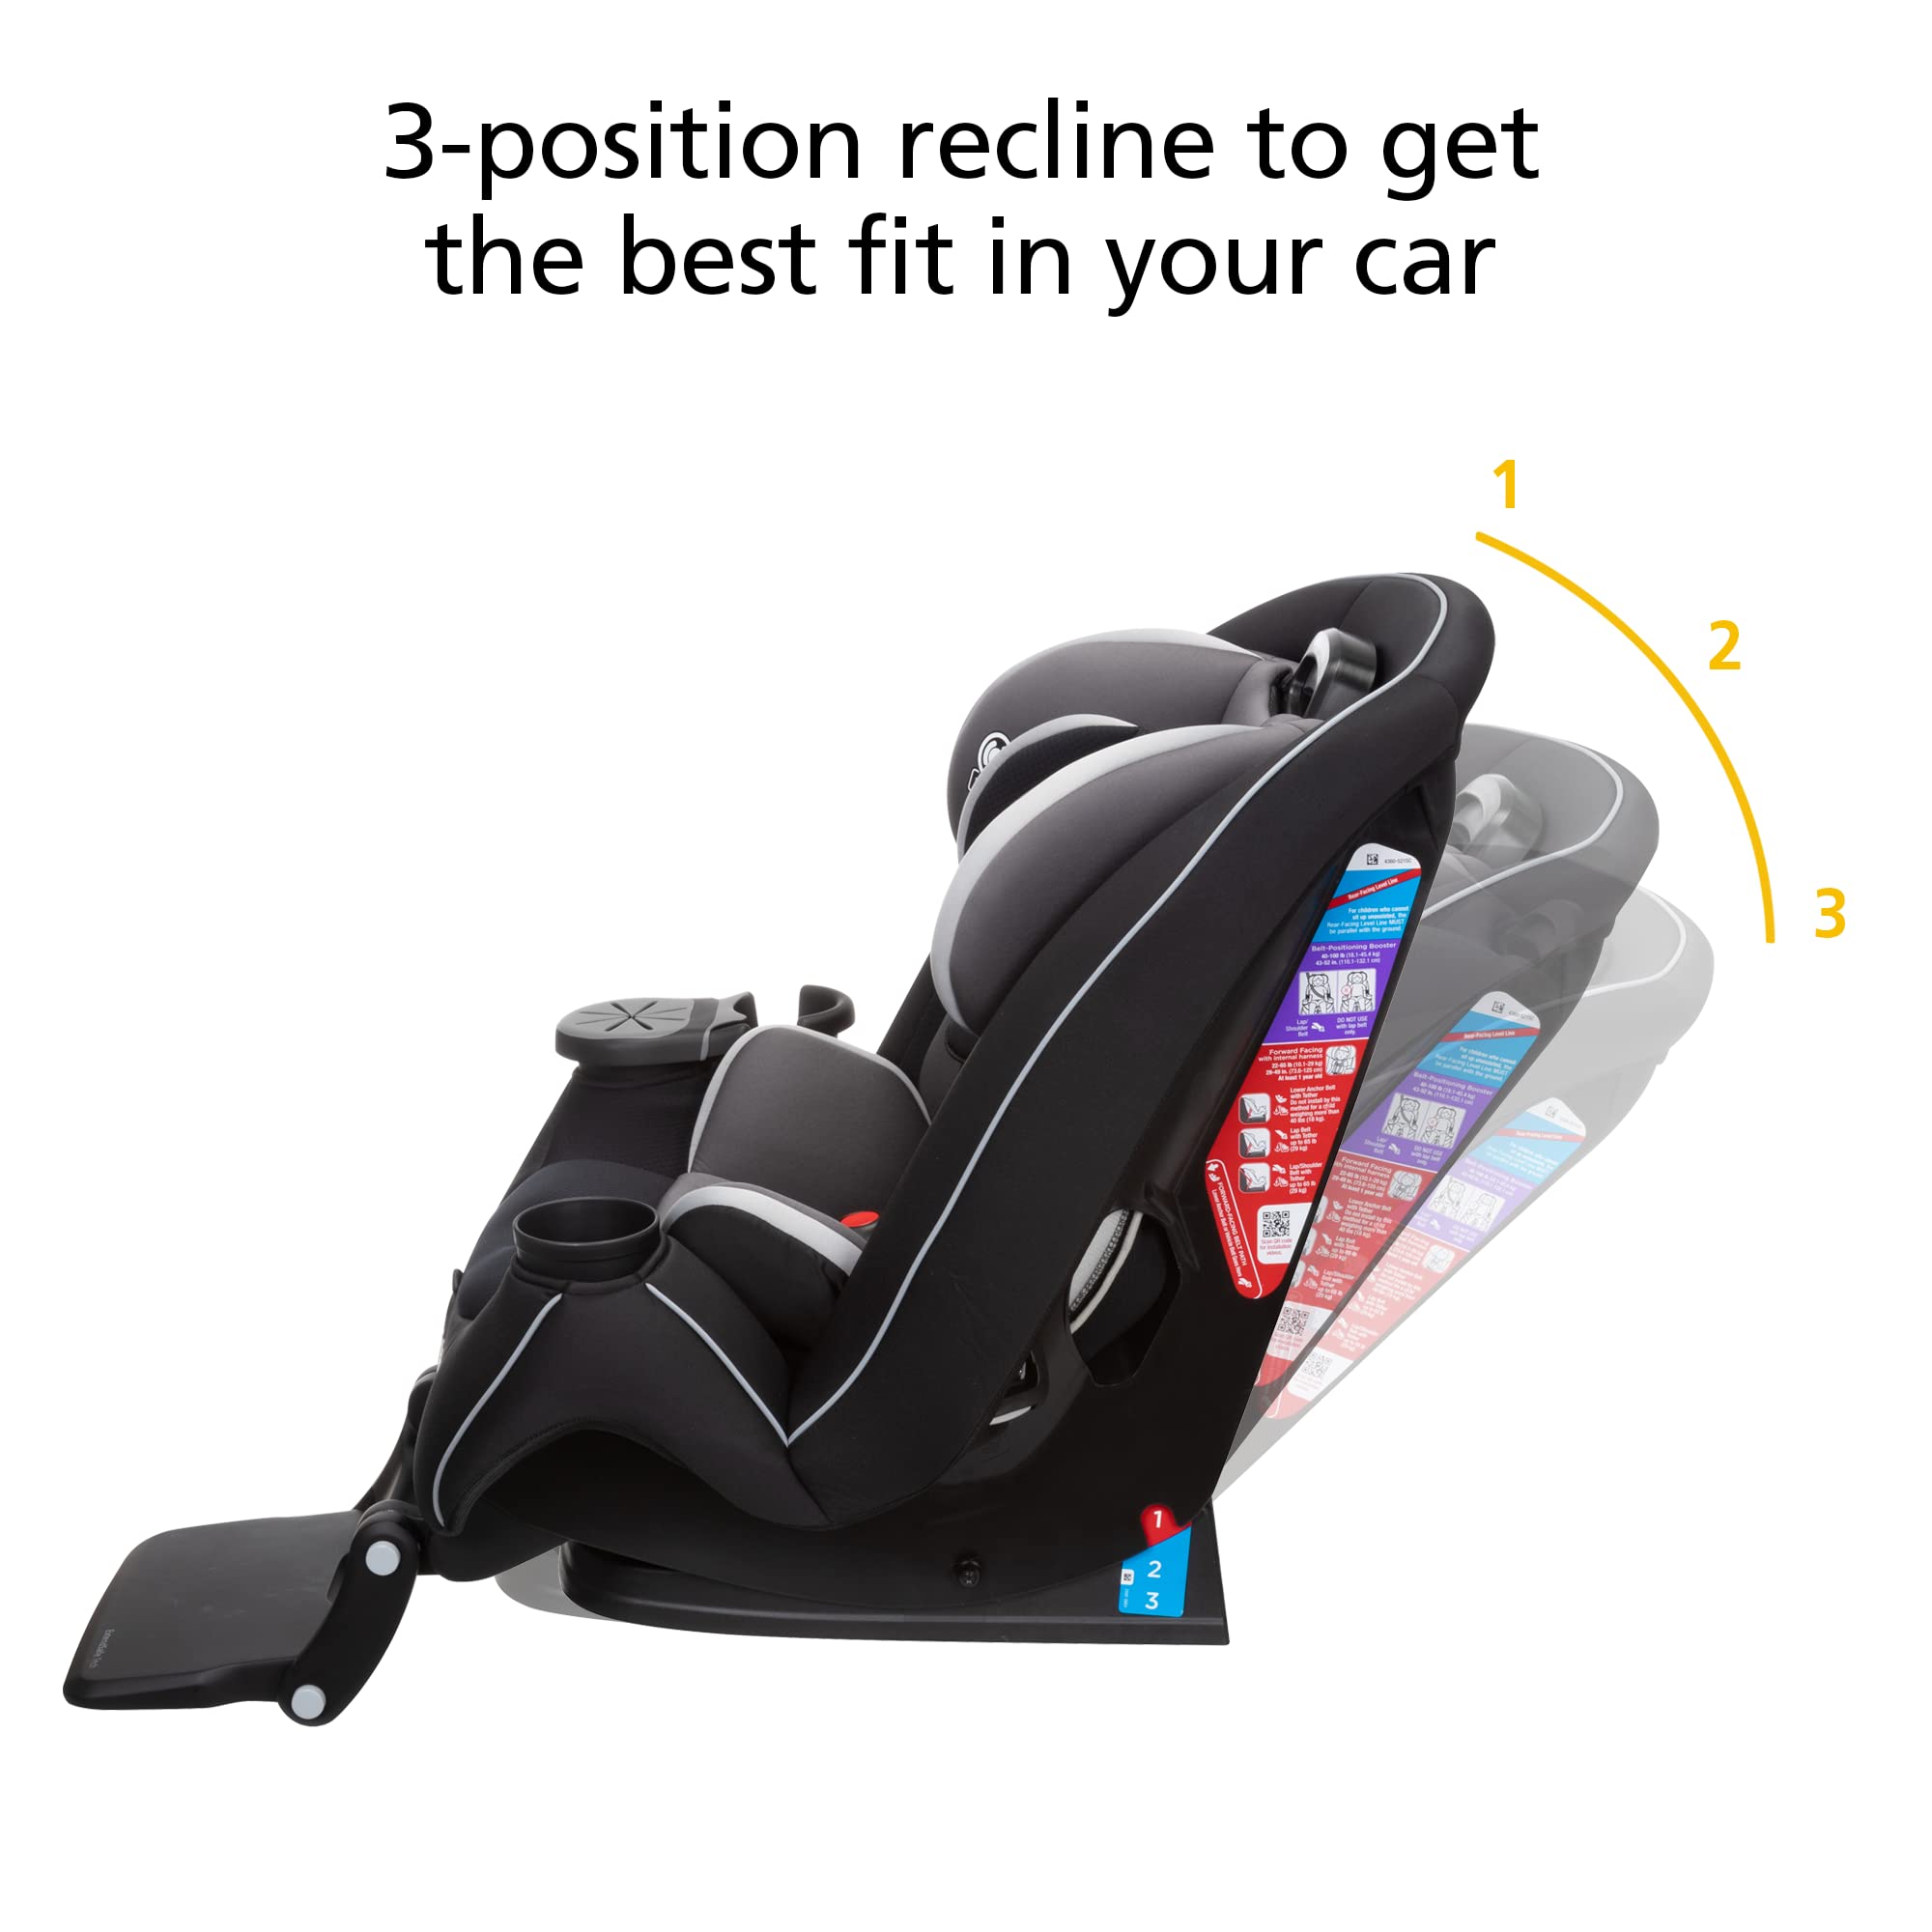 Safety 1ˢᵗ® Grow and Go™ Extend 'n Ride LX Convertible Car Seat, Blue Tilt